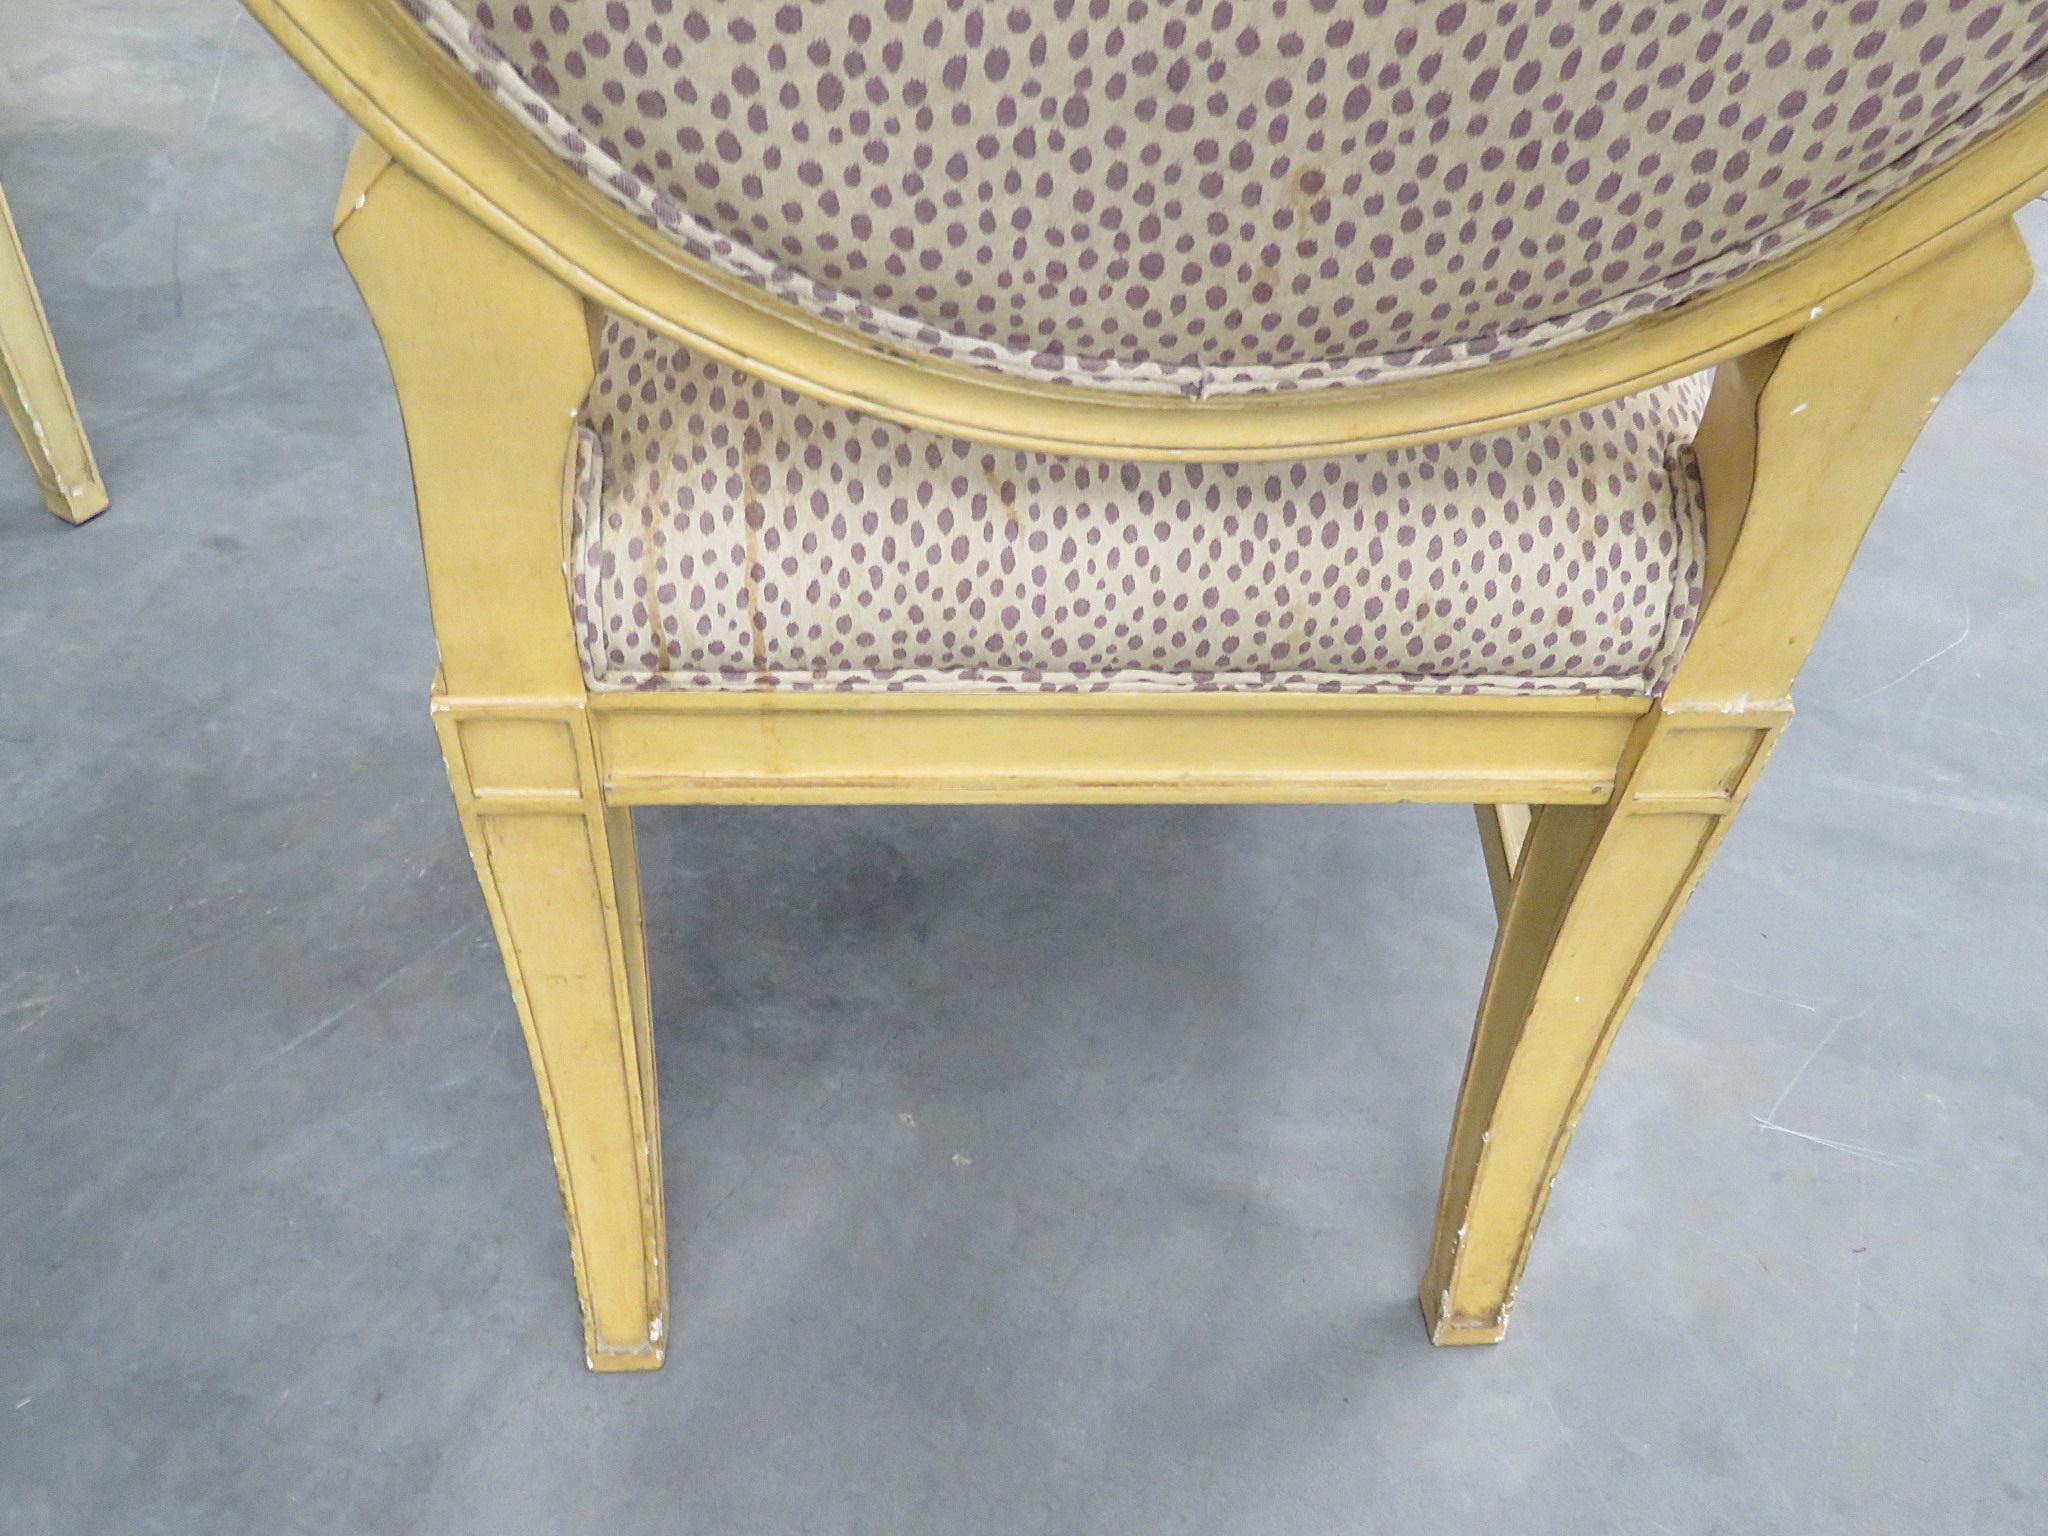 Beech Set of 10 Painted Maison Jansen Style Dining Side Chairs in the Directoire Style